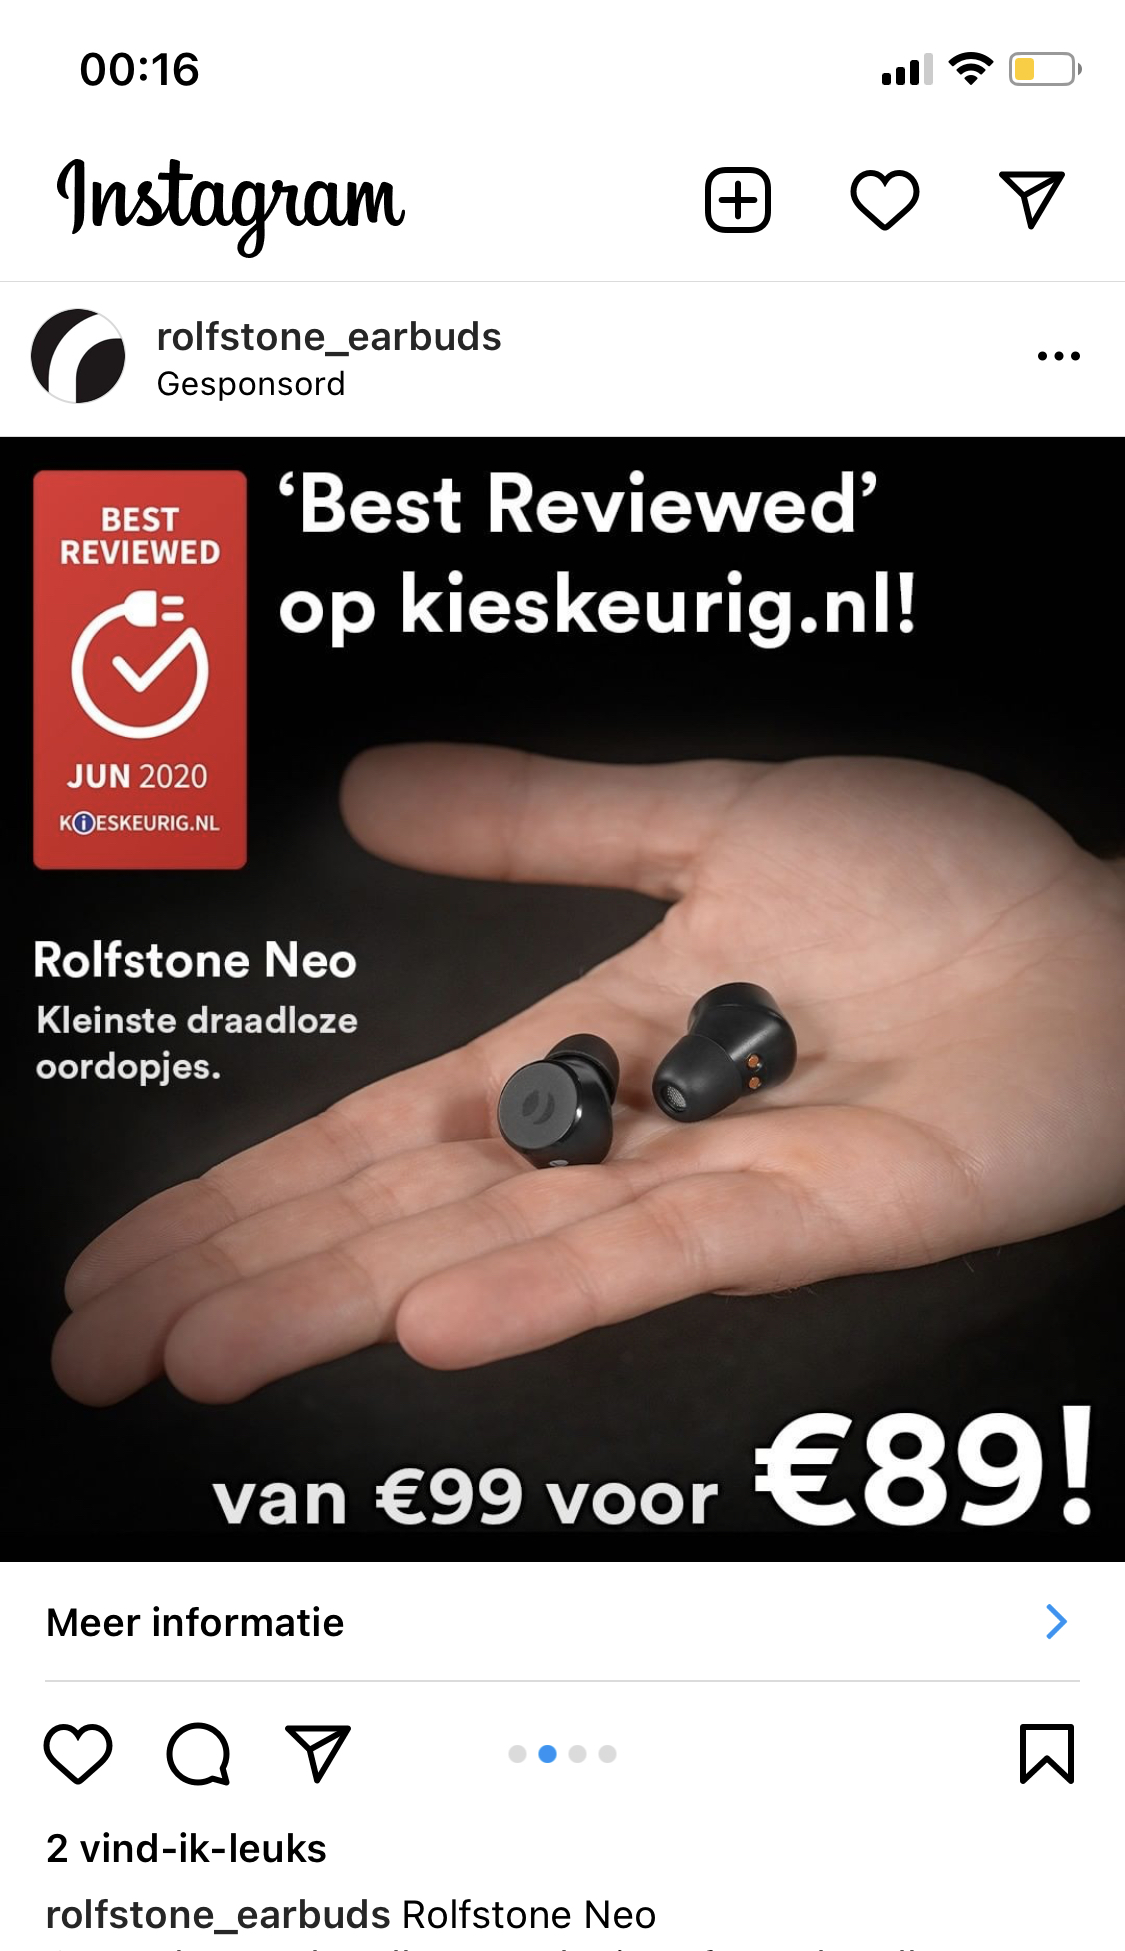 Willen herberg Vernauwd Scarbir Audio on Twitter: "I fucking loathe #Rolfstone wireless earbuds.  Just dump your logo on generic Alibaba earphones, why don't you? The Neo is  the $15 Tiso i5, the Neo Sport is